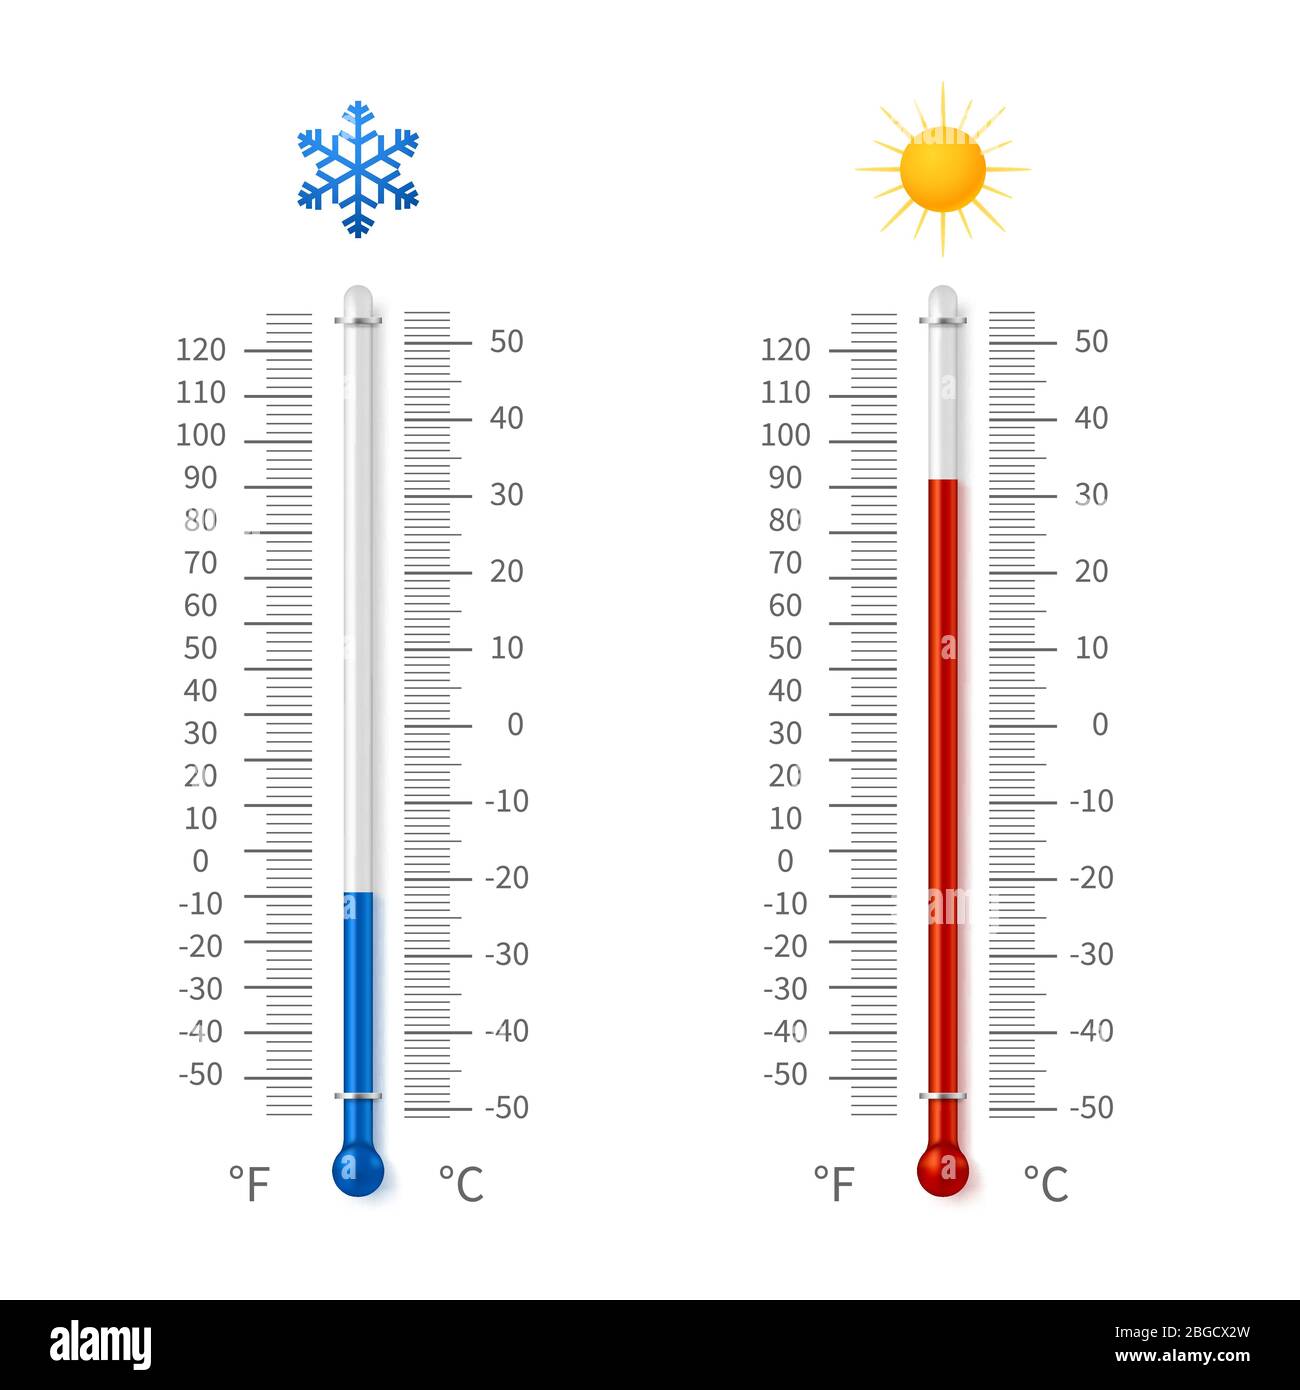 https://c8.alamy.com/comp/2BGCX2W/hot-and-cold-weather-temperature-symbols-meteorology-thermometers-with-celsius-and-fahrenheit-scale-vector-illustration-thermometer-fahrenheit-and-celsius-degree-measurement-2BGCX2W.jpg